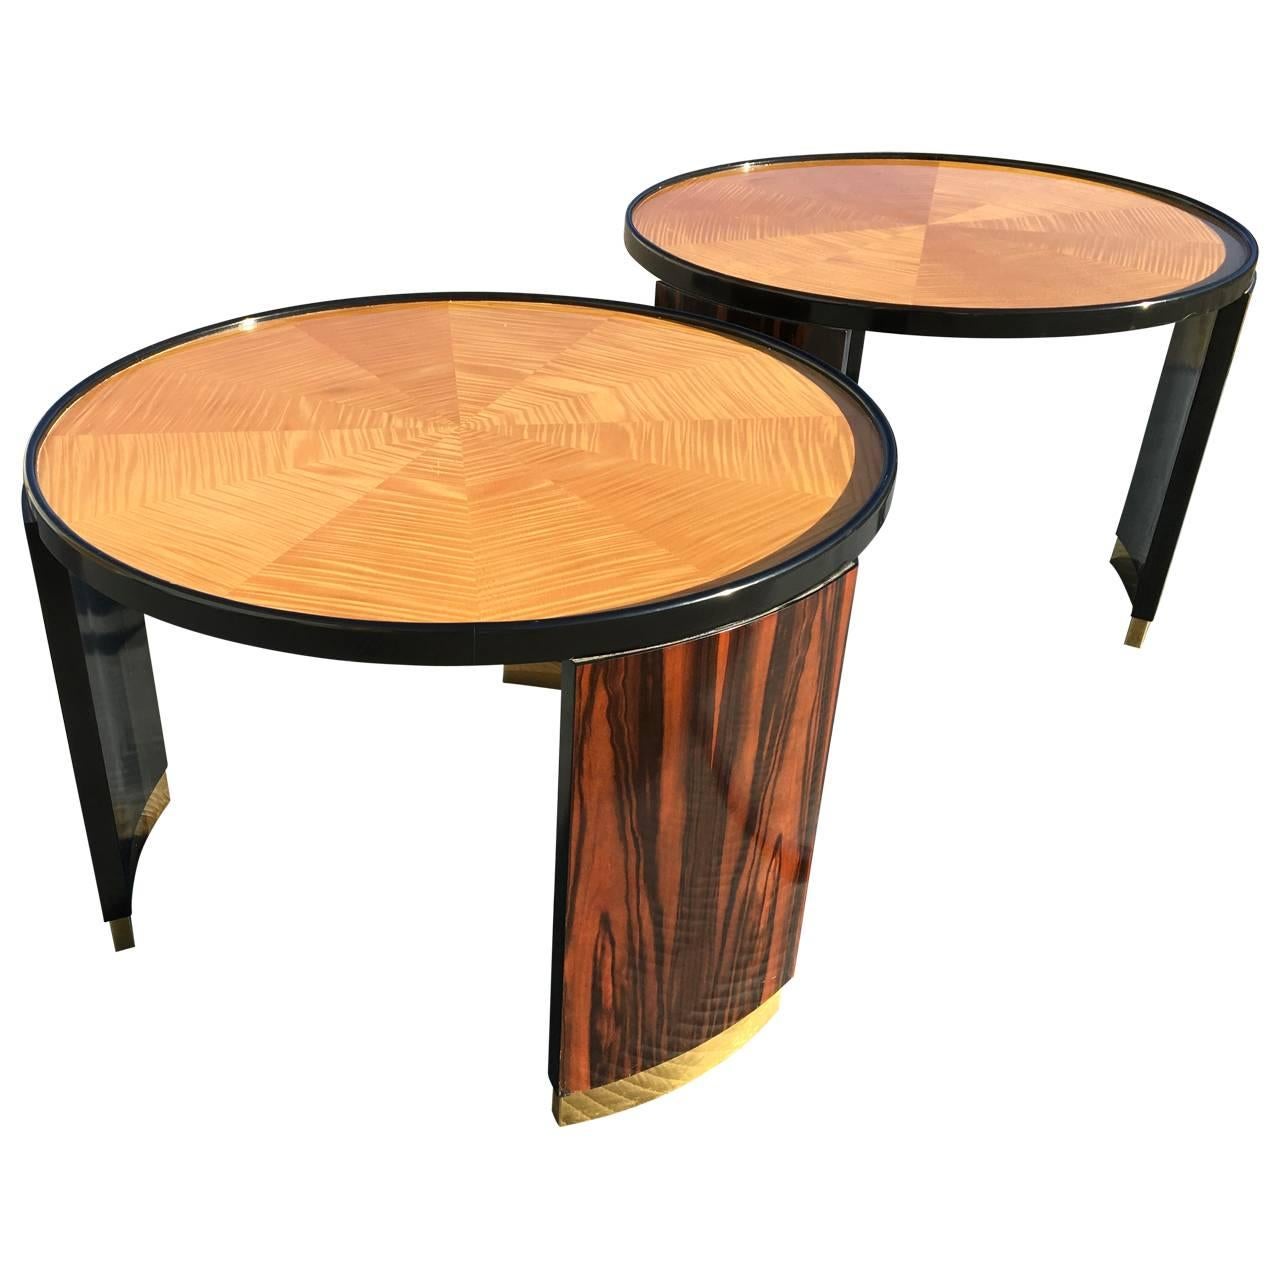 A stunning pair of side tables designed by Bernard Rohde are in super condition. The tops are in sunburst design, made of tiger maple and with black lacquered edge. The sides or legs are made of exotic Madagascar ebony with brass caps at the base.